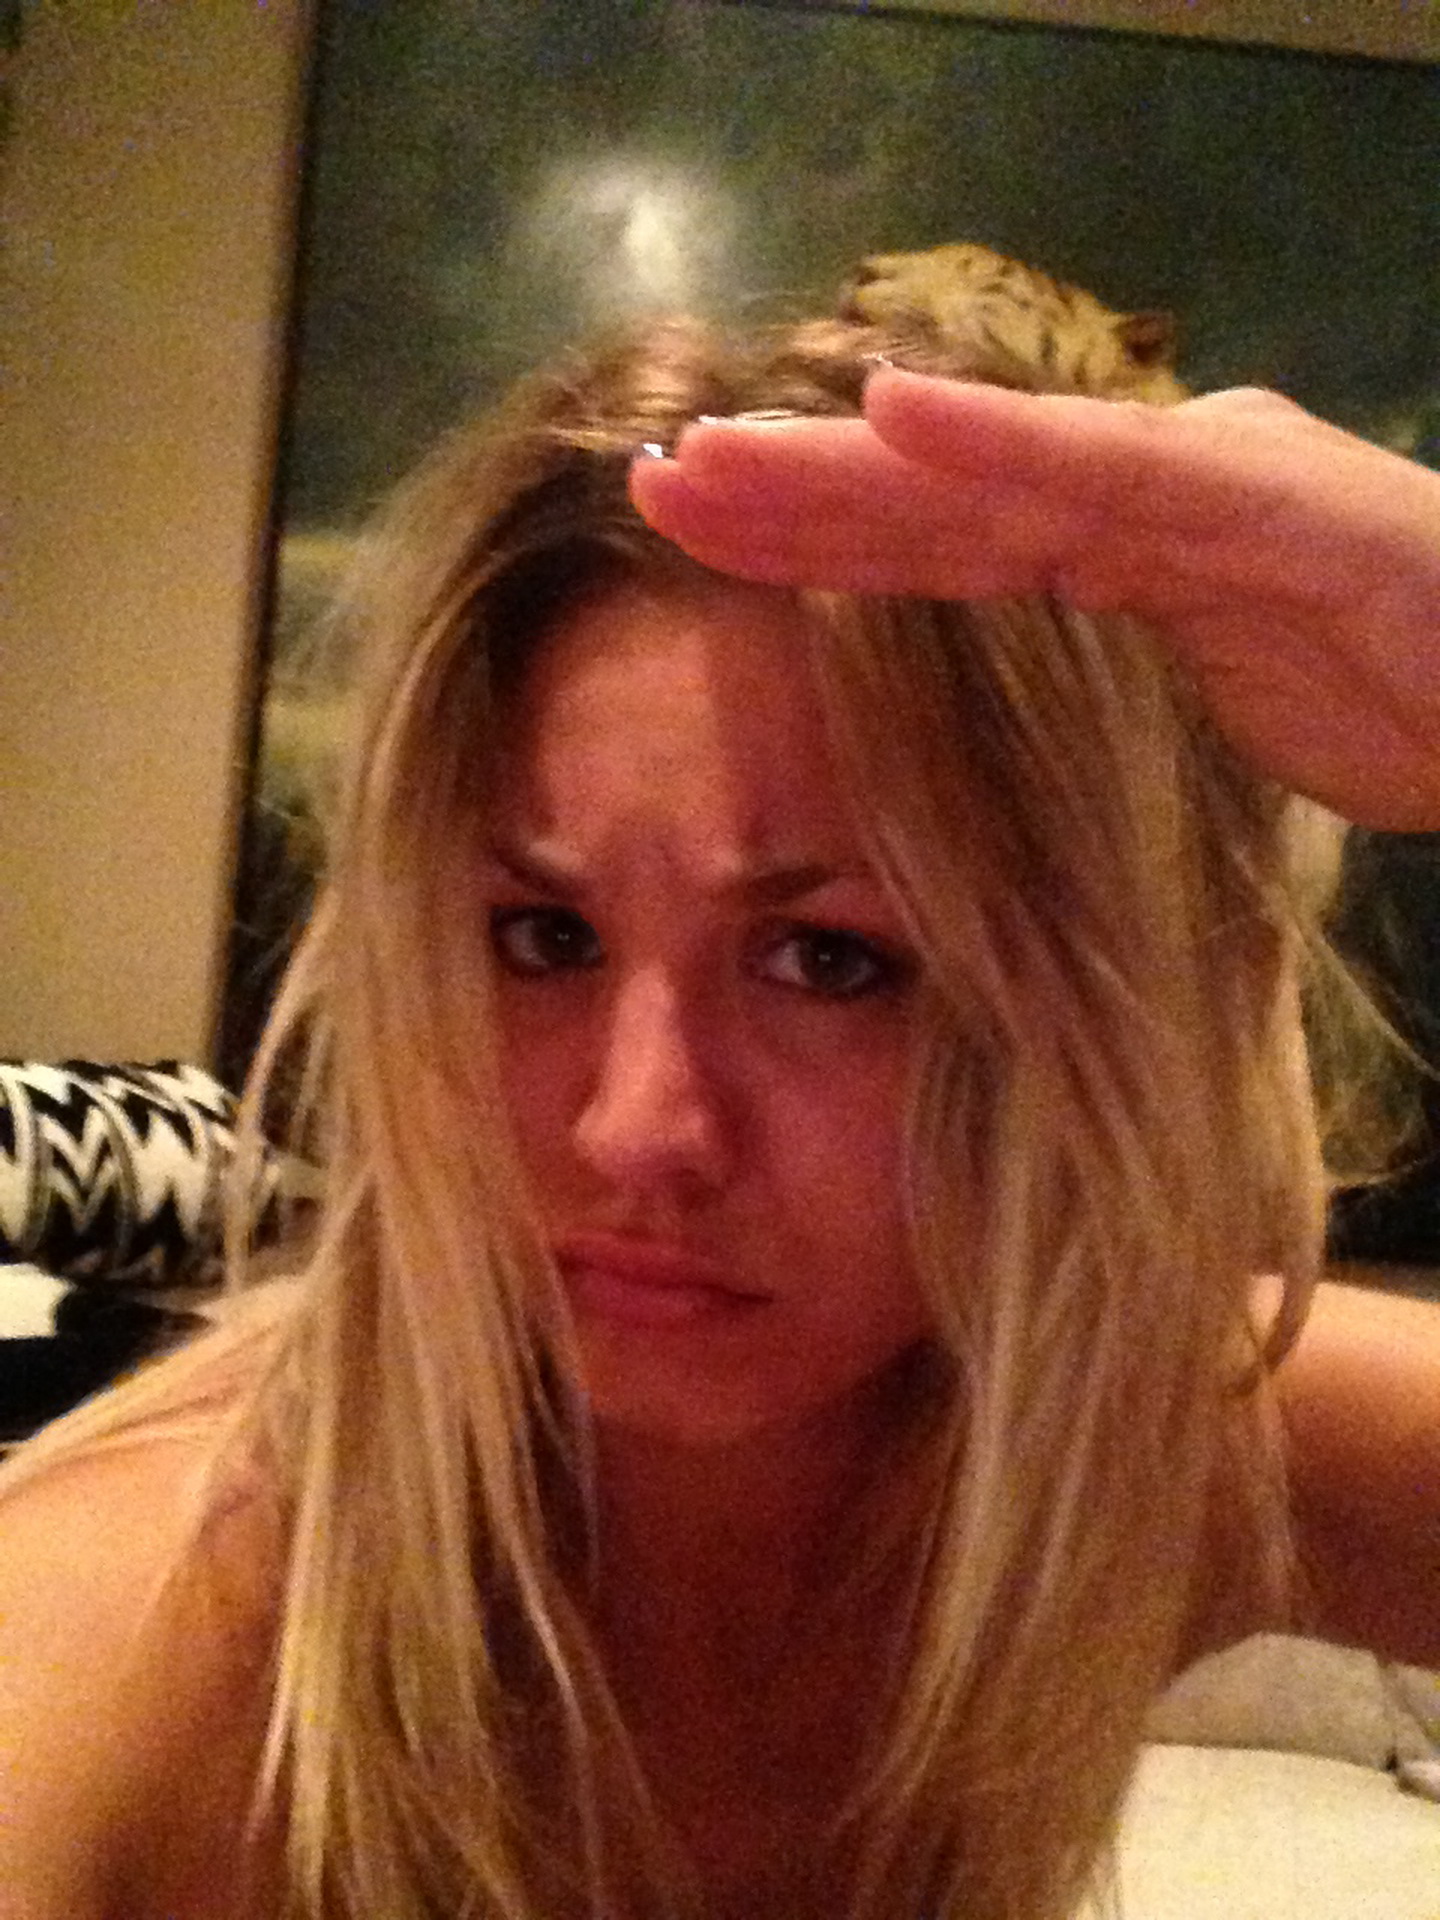 Kaley_Cuoco_leaked_private_nude_photo_and_video_hacked_personal_naked_pics_46x_MixQ_14.JPG